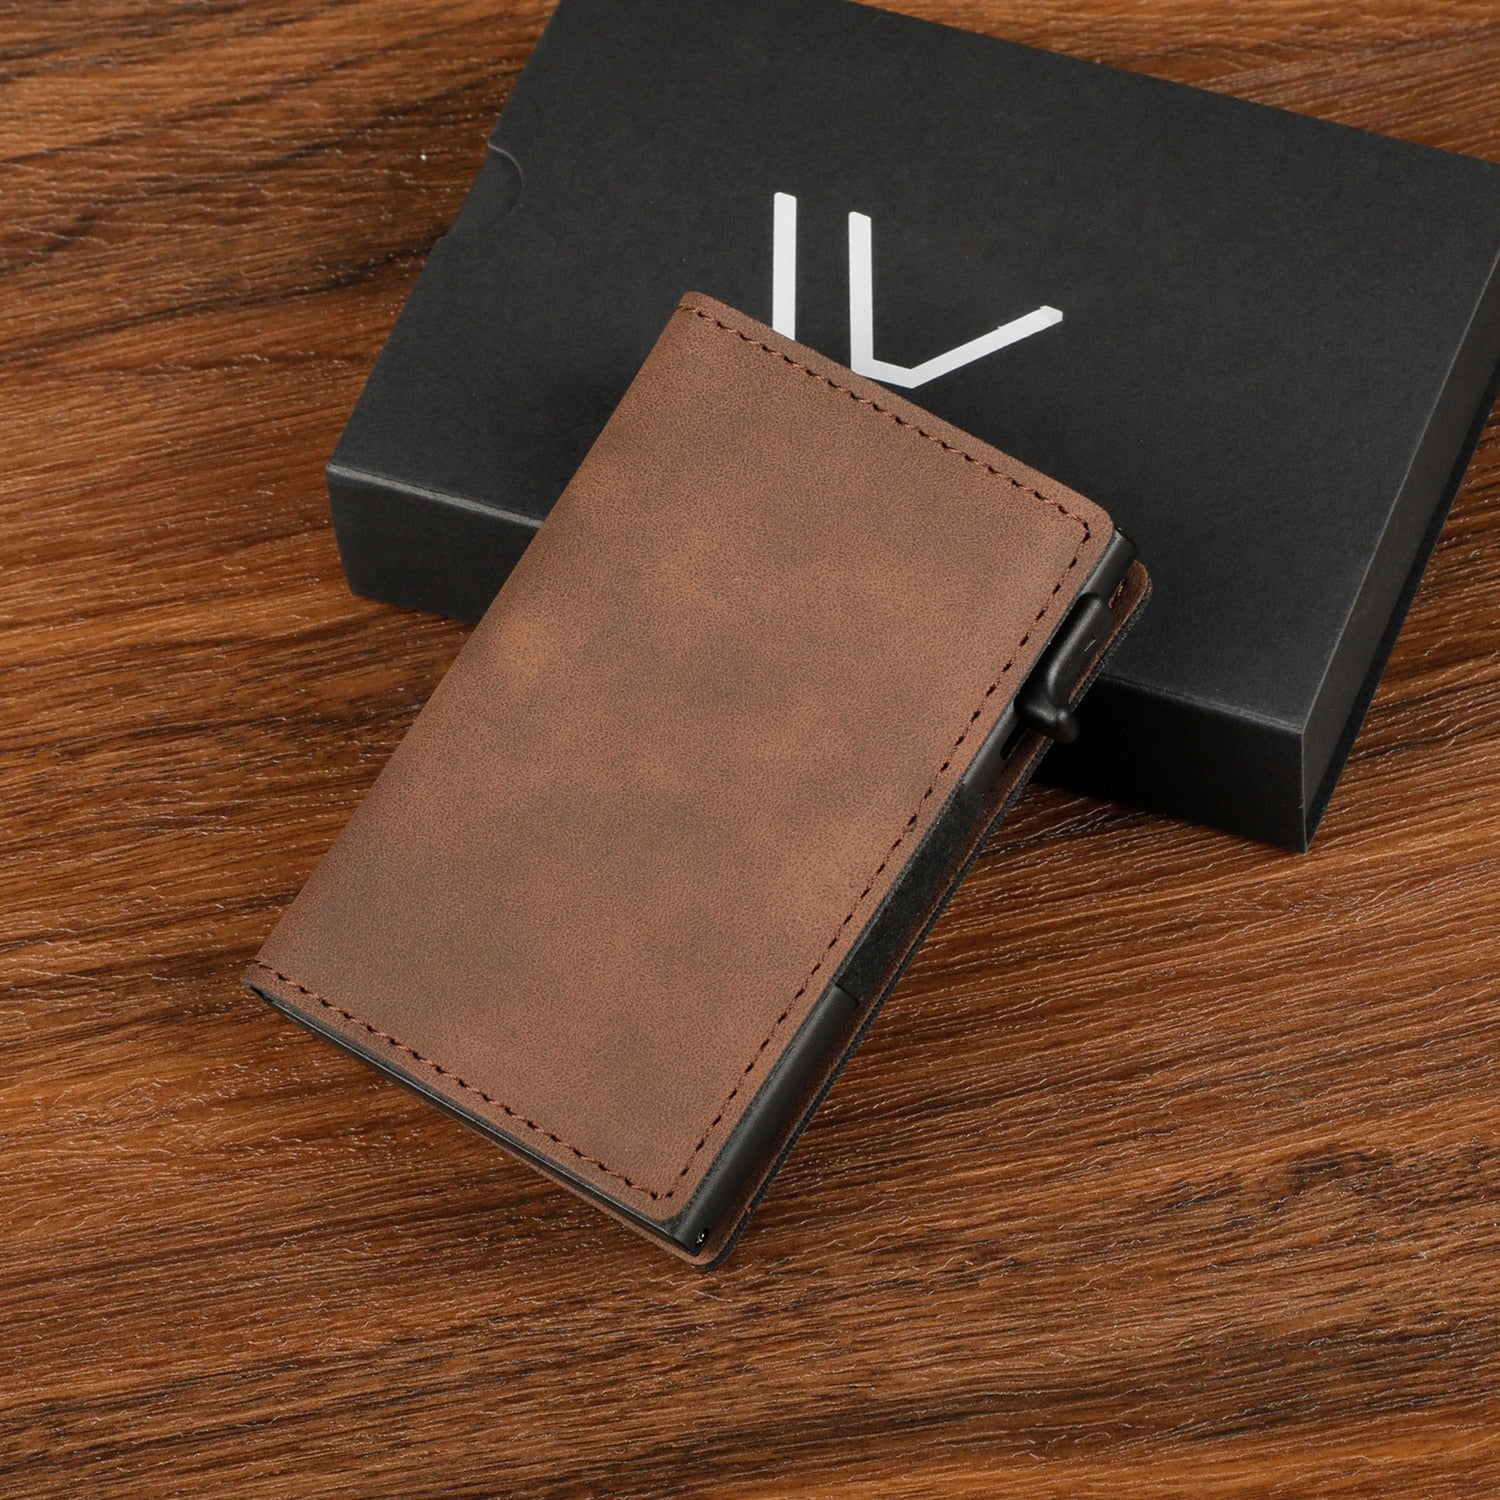 Smart Wallet For Airtag